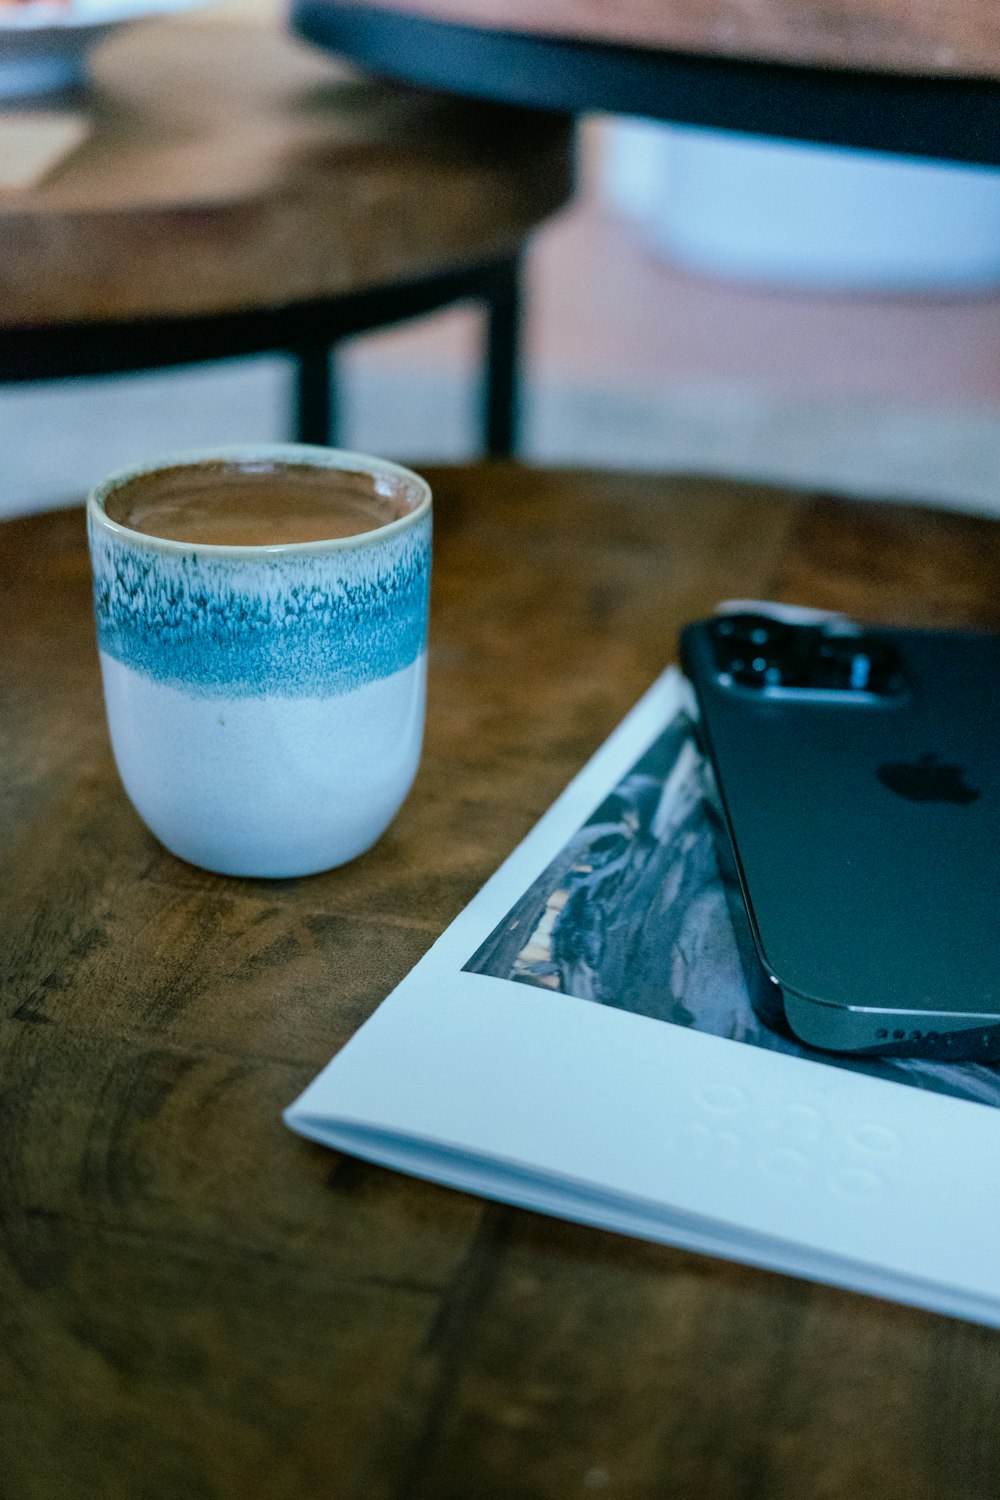 a cup of coffee next to an ipad on a table